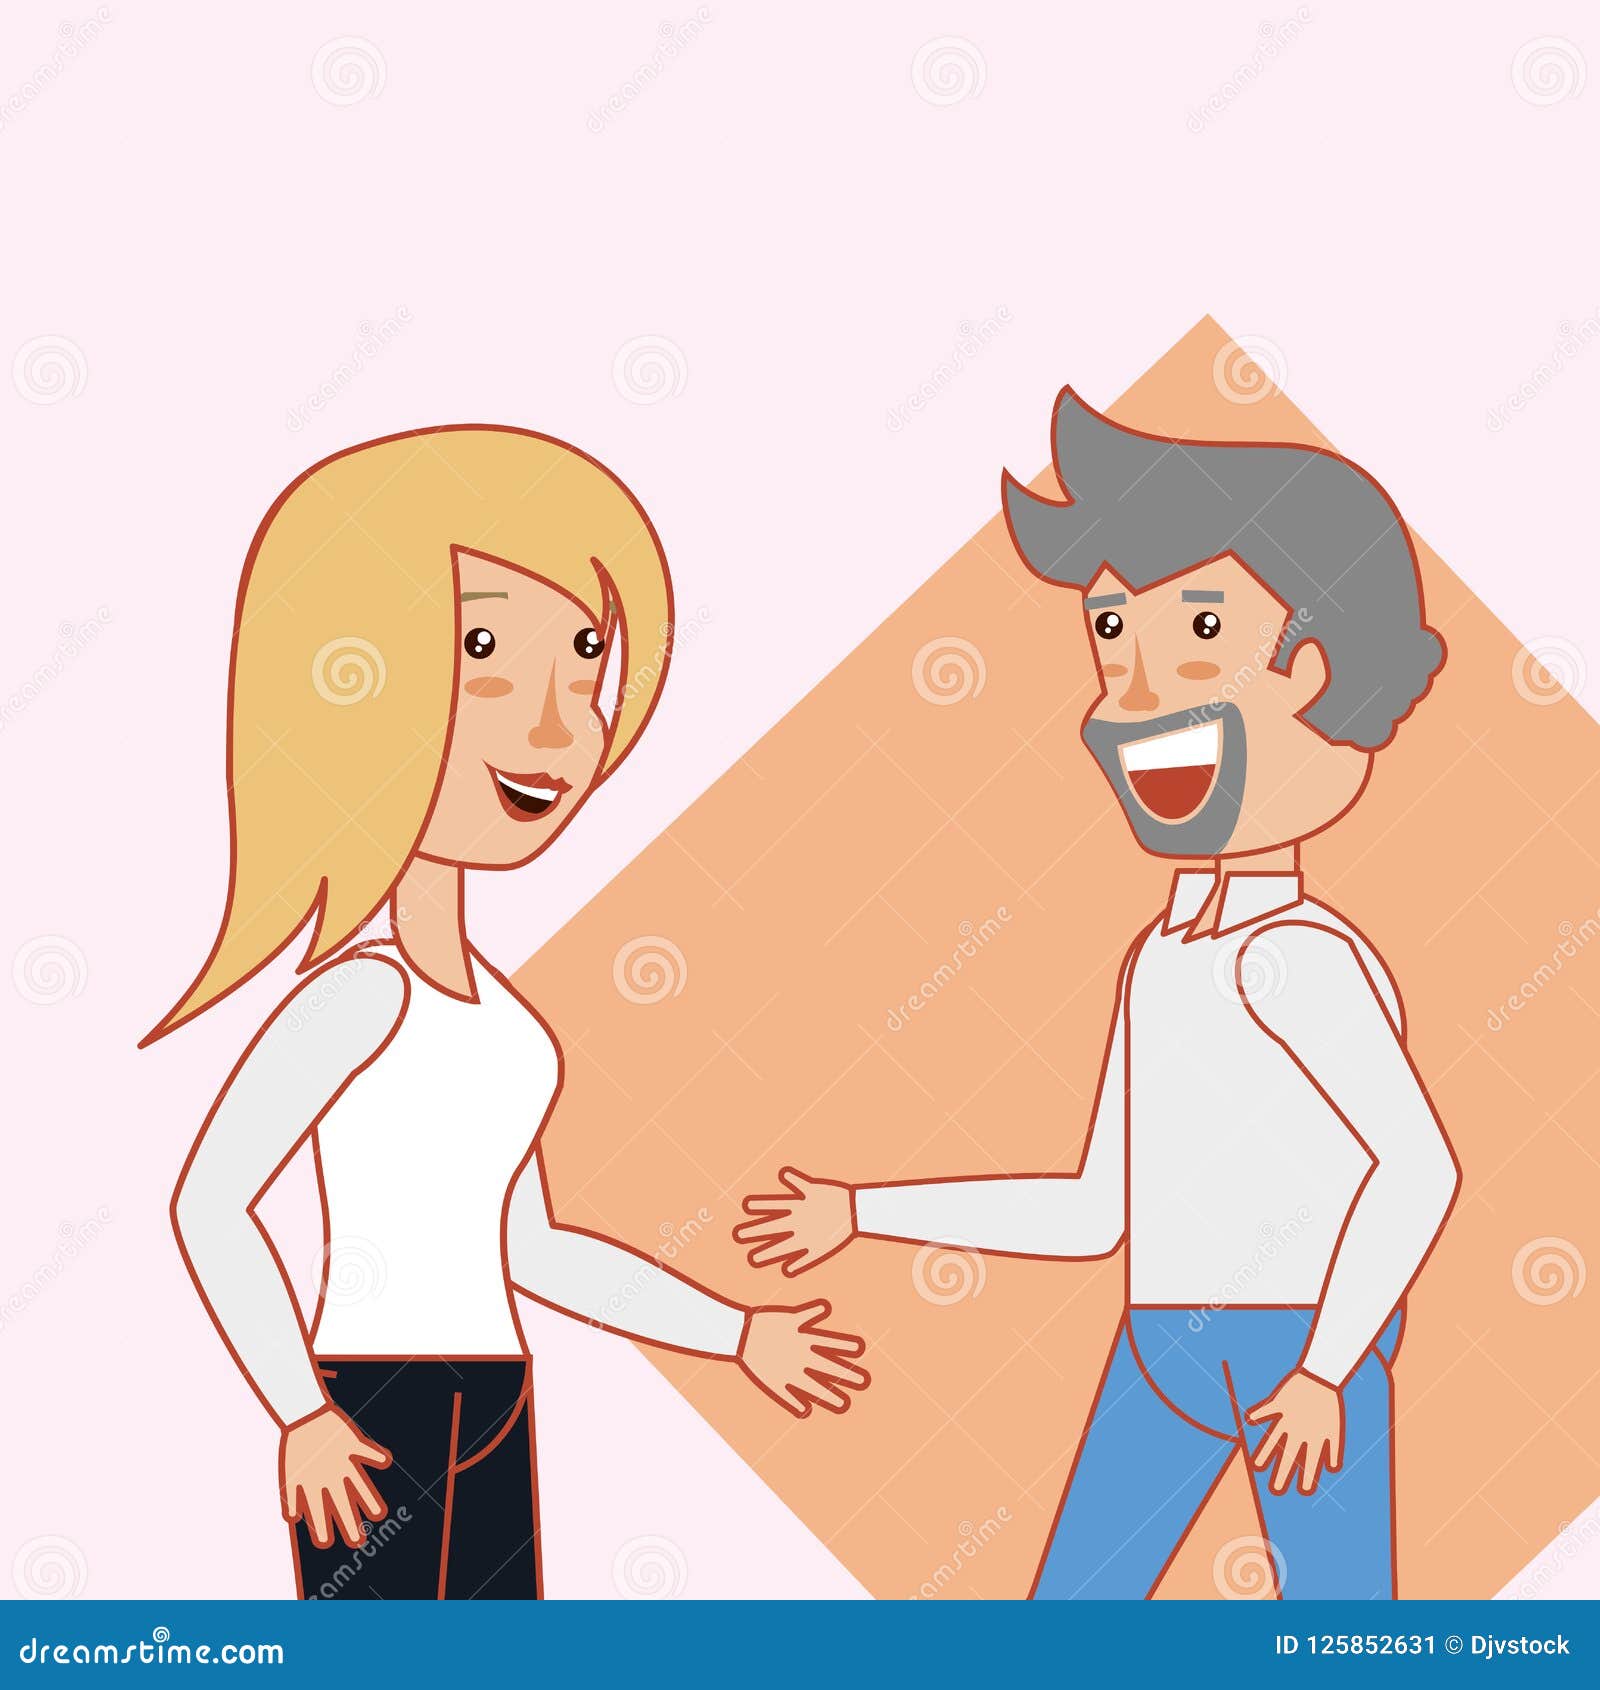 Cartoon man and woman icon stock vector. Illustration of adult - 125852631